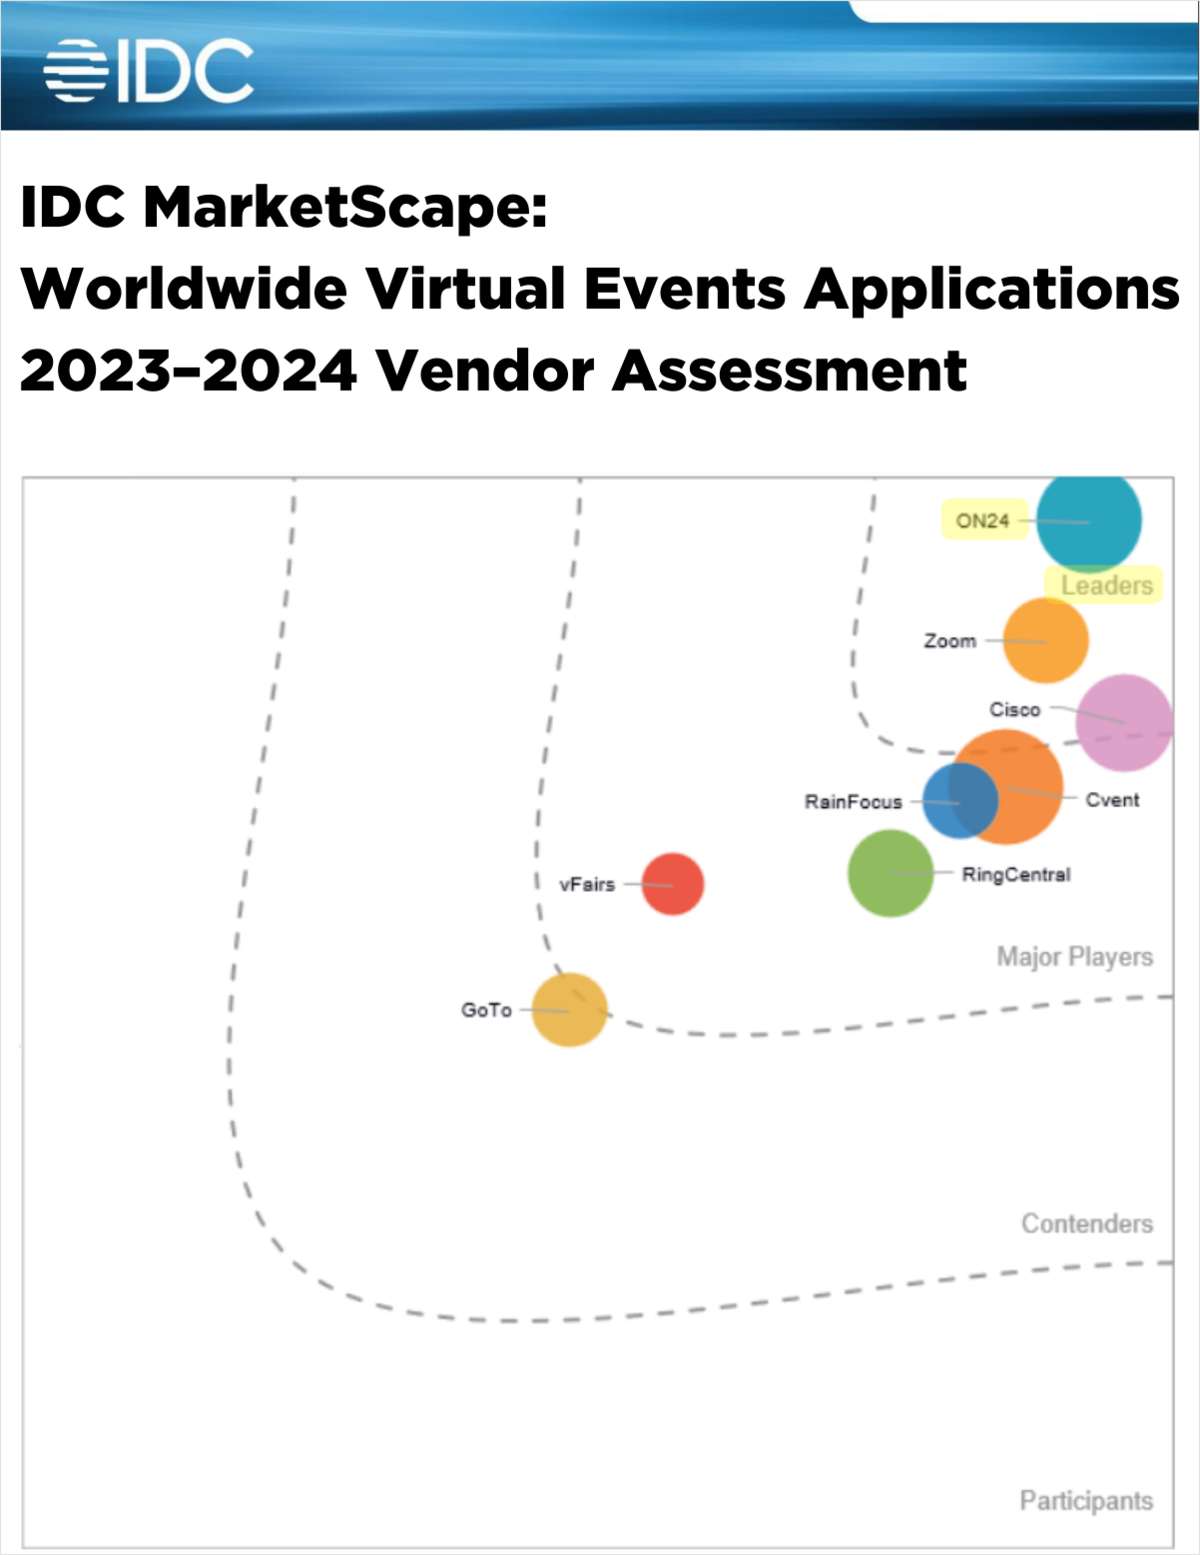 ON24 Named a Leader in IDC MarketScape for Worldwide Virtual Event Applications